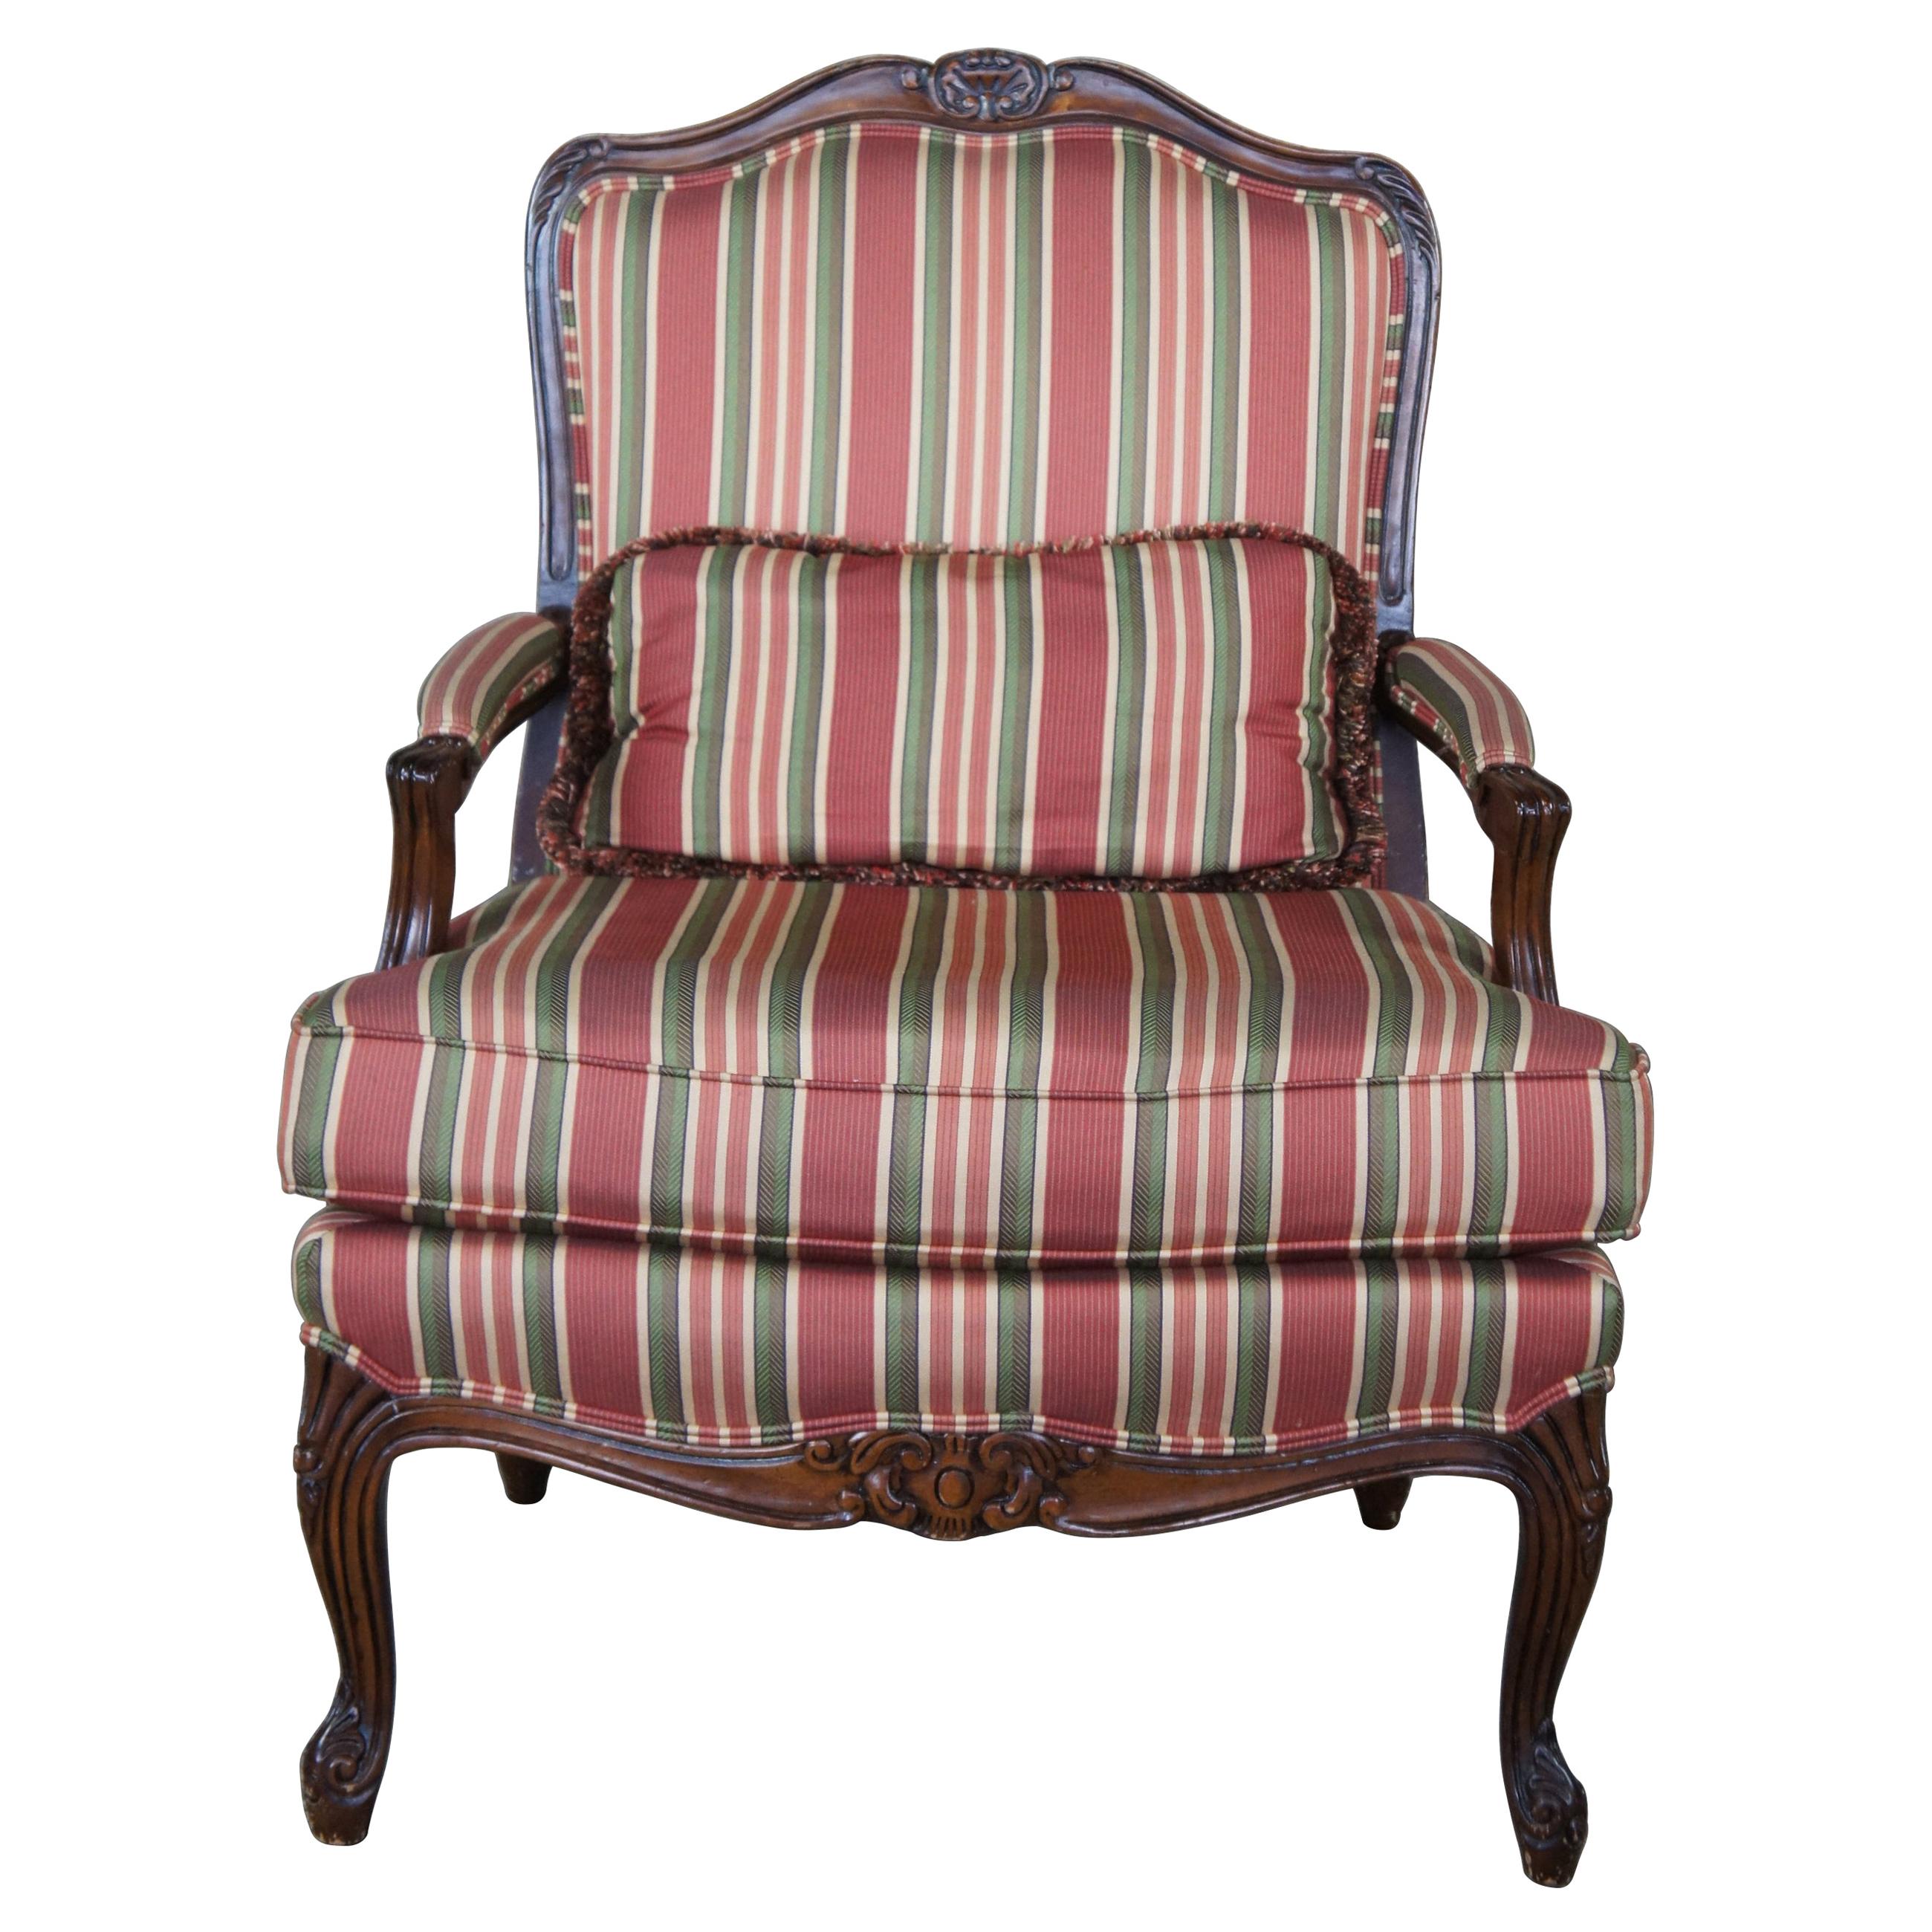 Vintage French Louis XV Walnut Fauteuil Library Arm Chair Striped Upholstery